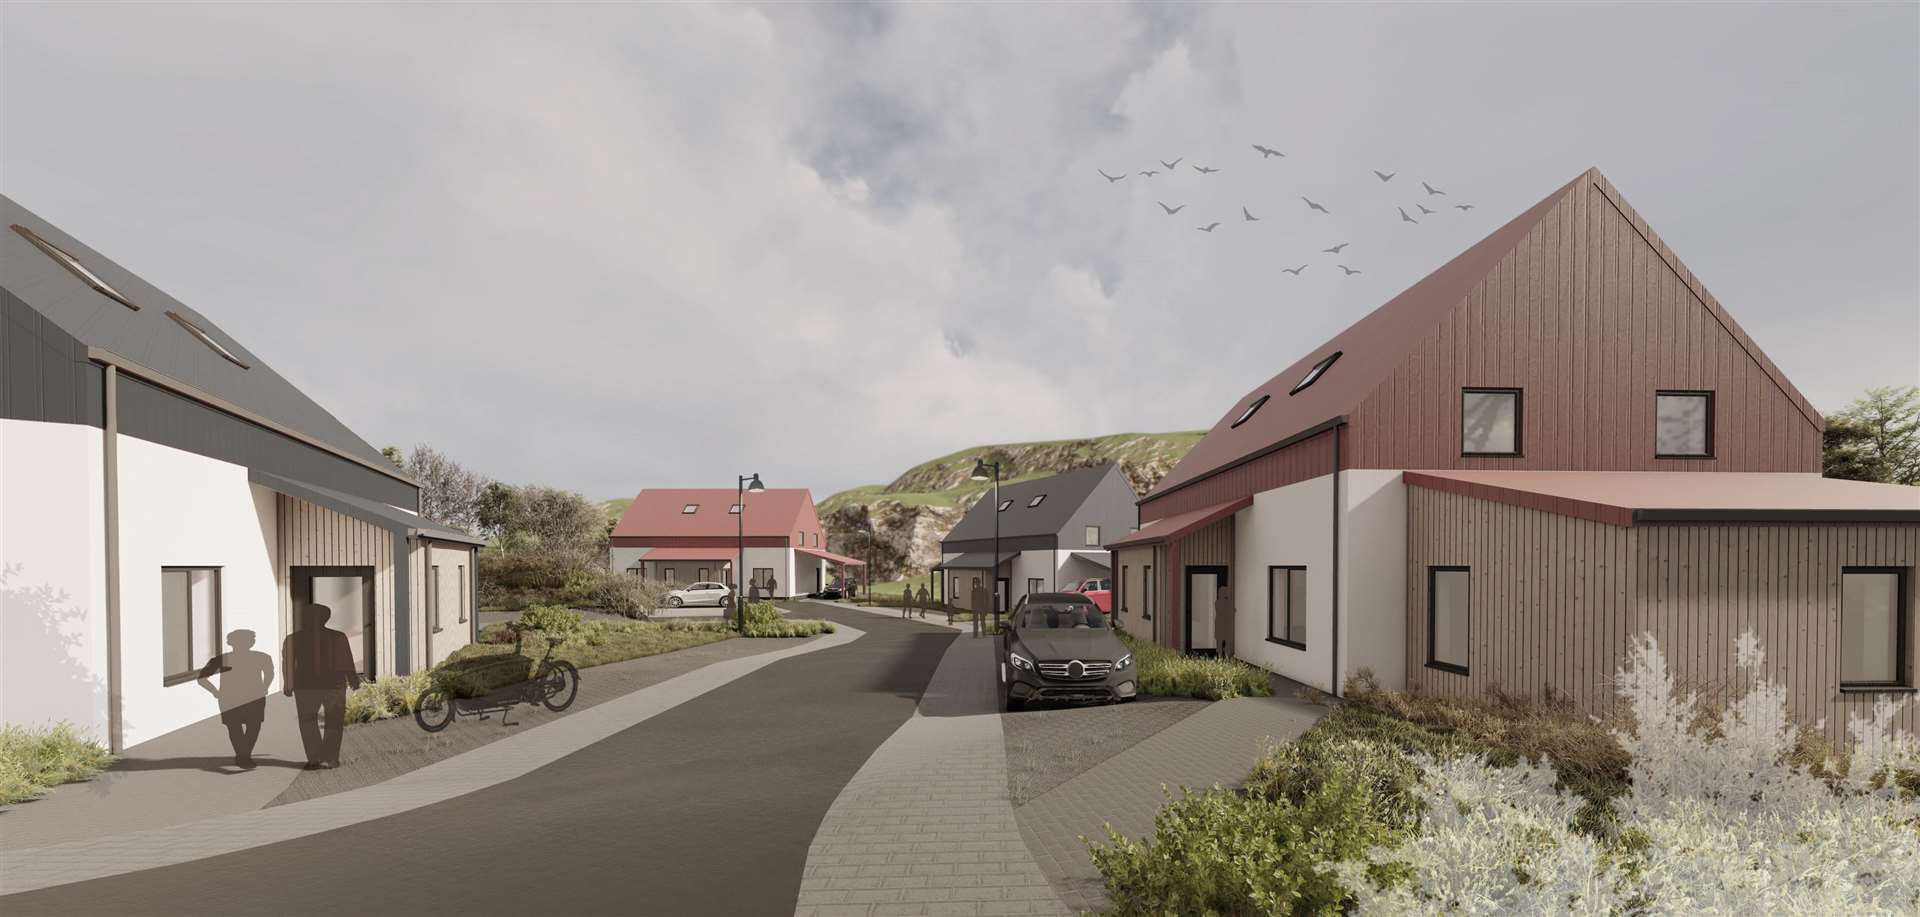 Ten new homes will be built in the first phase of the Lochinver Glebe development. Photo: Oberlanders Architects